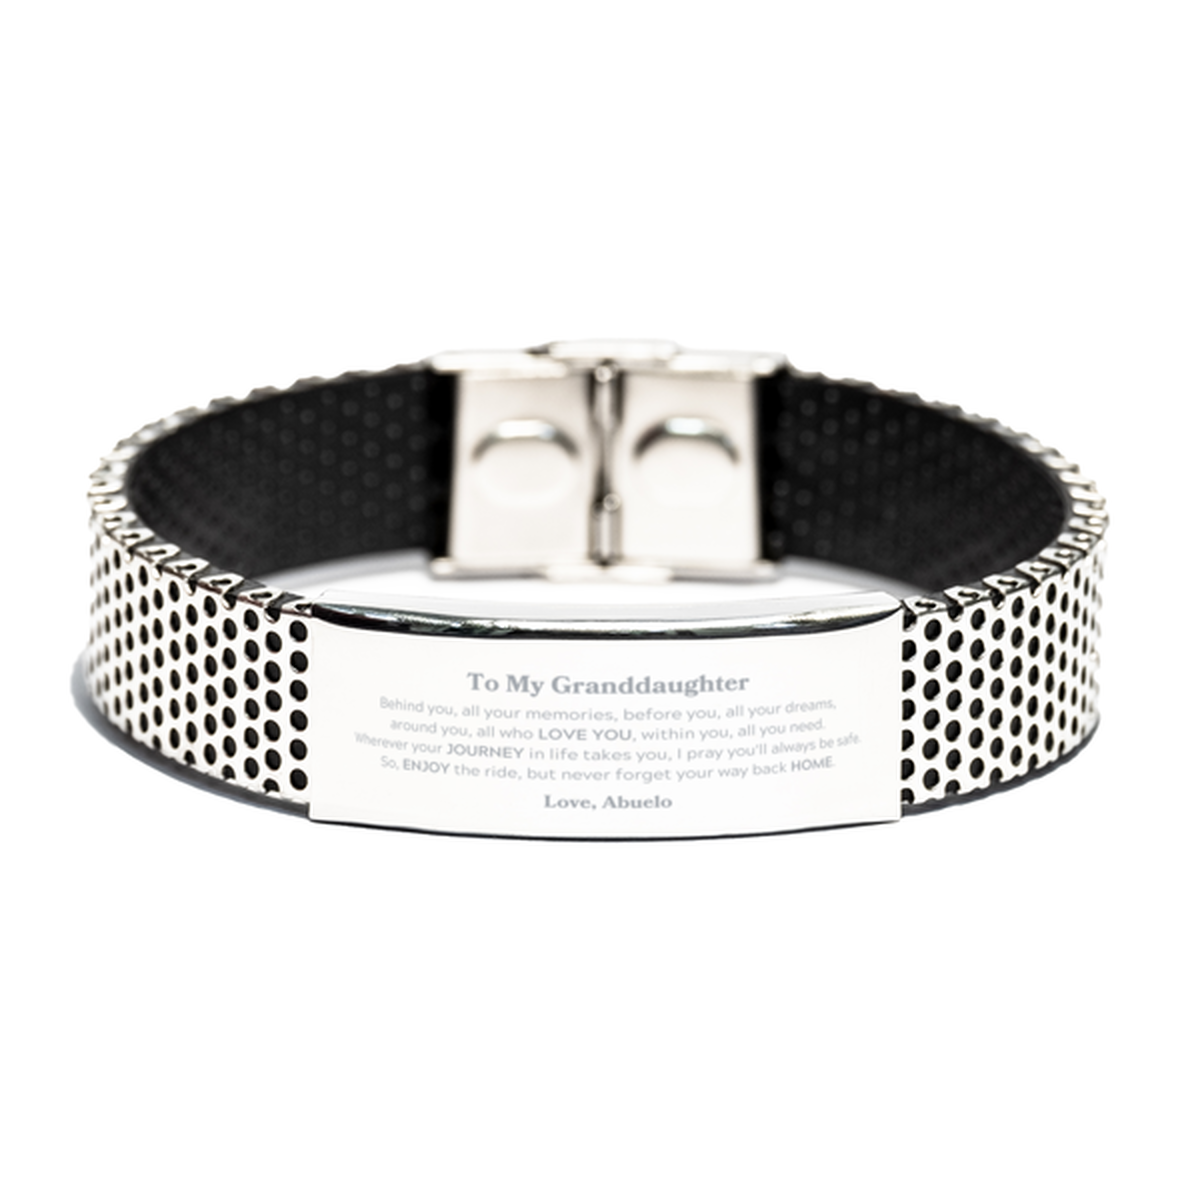 To My Granddaughter Graduation Gifts from Abuelo, Granddaughter Stainless Steel Bracelet Christmas Birthday Gifts for Granddaughter Behind you, all your memories, before you, all your dreams. Love, Abuelo